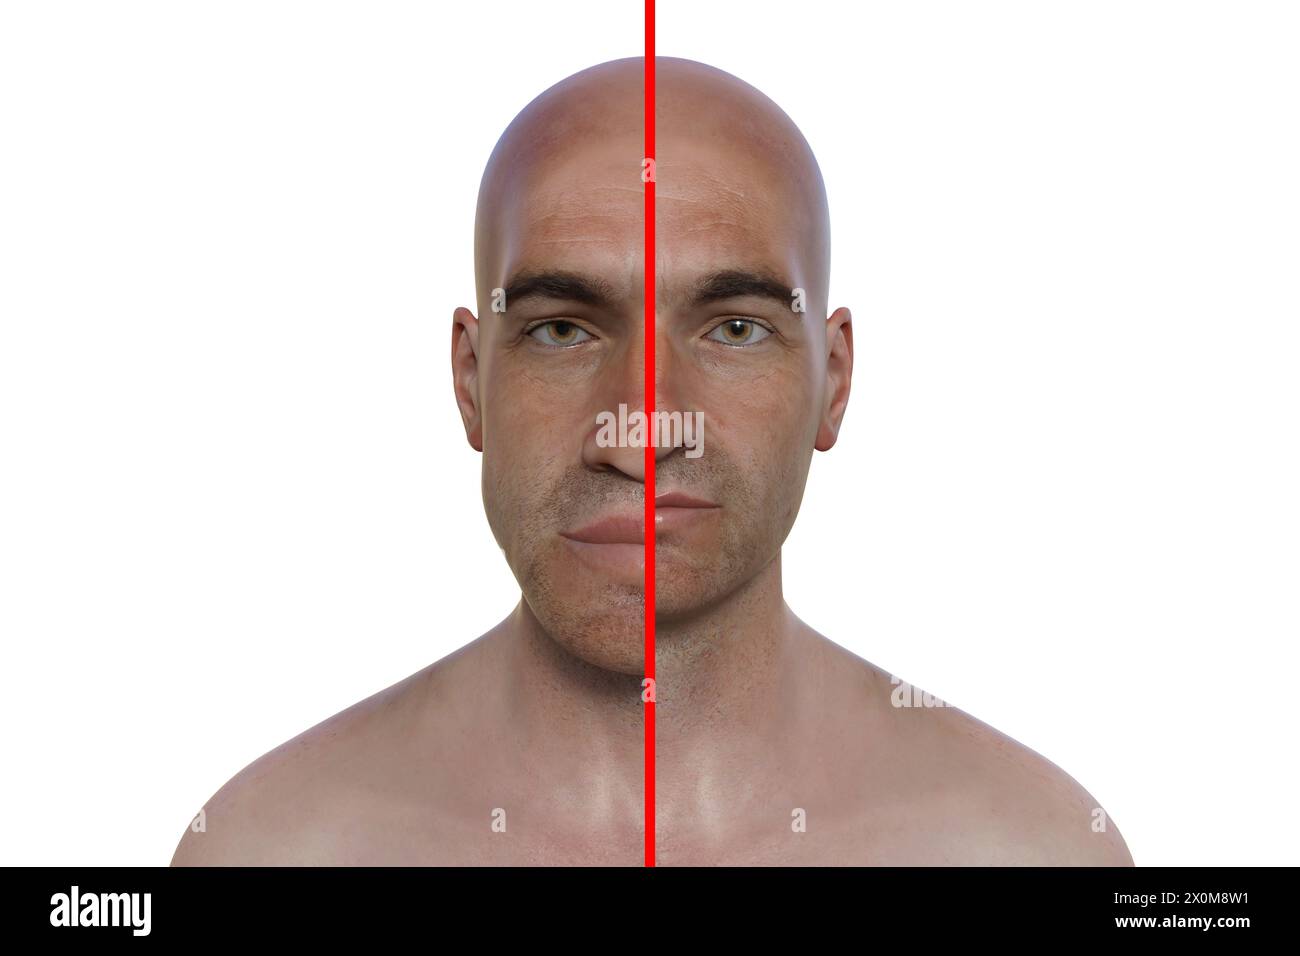 3D illustration comparing a man with acromegaly (left) and the same healthy man (right). Acromegaly is a condition causing an increase in the size of various body parts including the facial features. It is caused by the overproduction of somatotrophin (human growth hormone) typically resulting from a benign tumour (adenoma) forming on the pituitary gland. Stock Photo